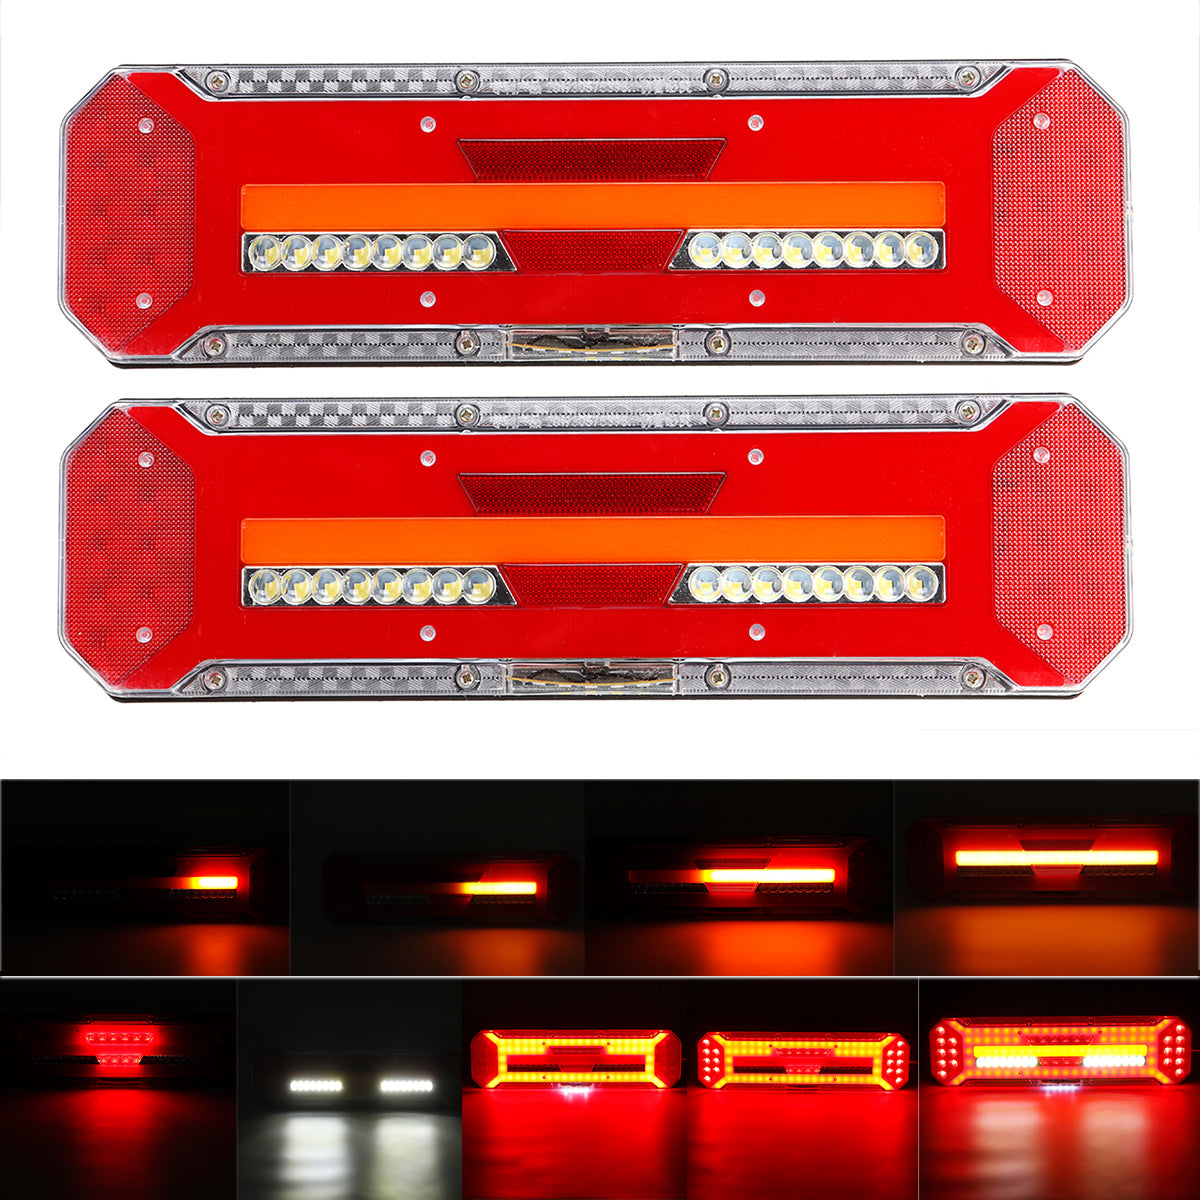 Red 24V LED Flowing Rear Tail Light Turn Signal Brake Reverse Stop Lamp For Trailer Truck Lorry Bus Boat